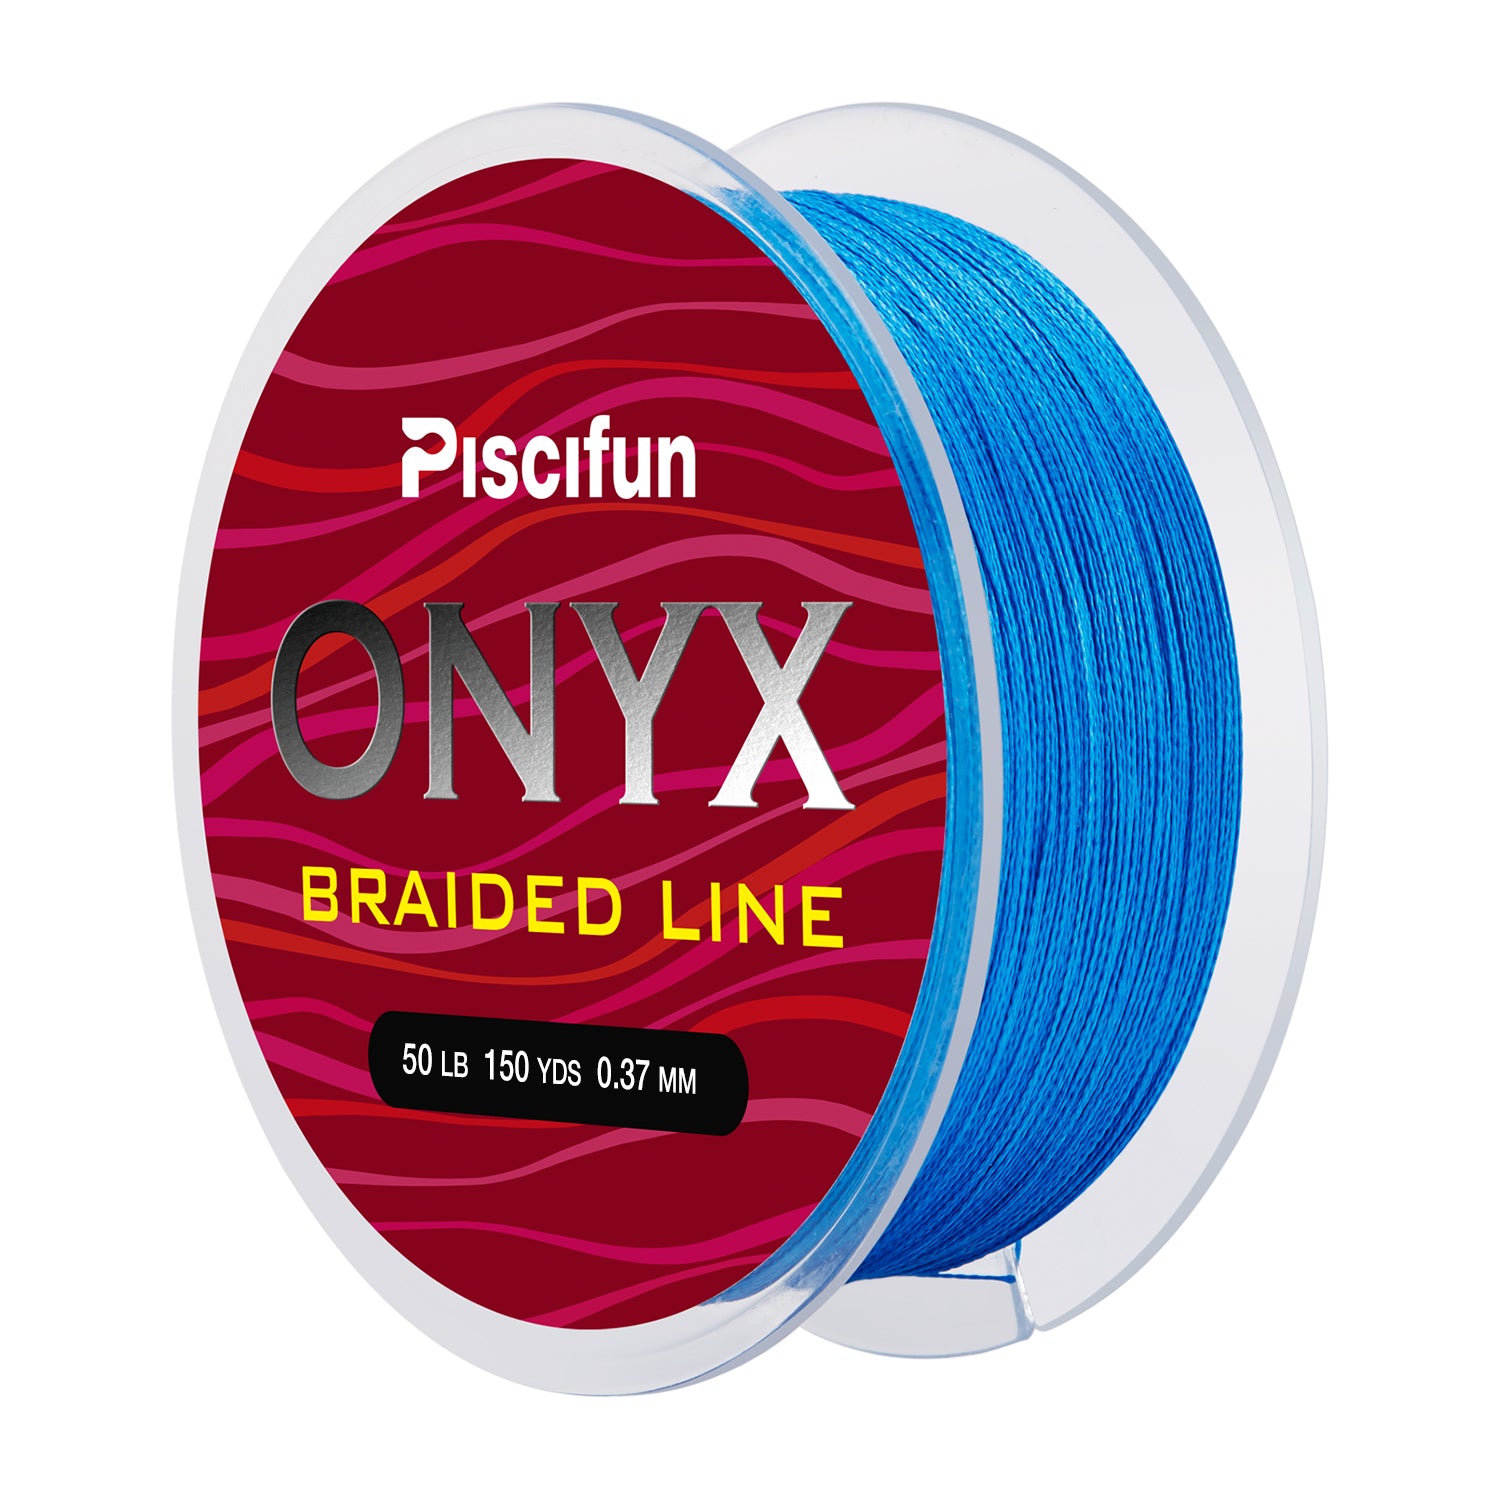 Piscifun Onyx Braided Fishing Line 6lb-150lb Superline Abrasion Resistant  Braided Lines Super Strong High Performance PE Fishing Lines - Buy Online -  106765219